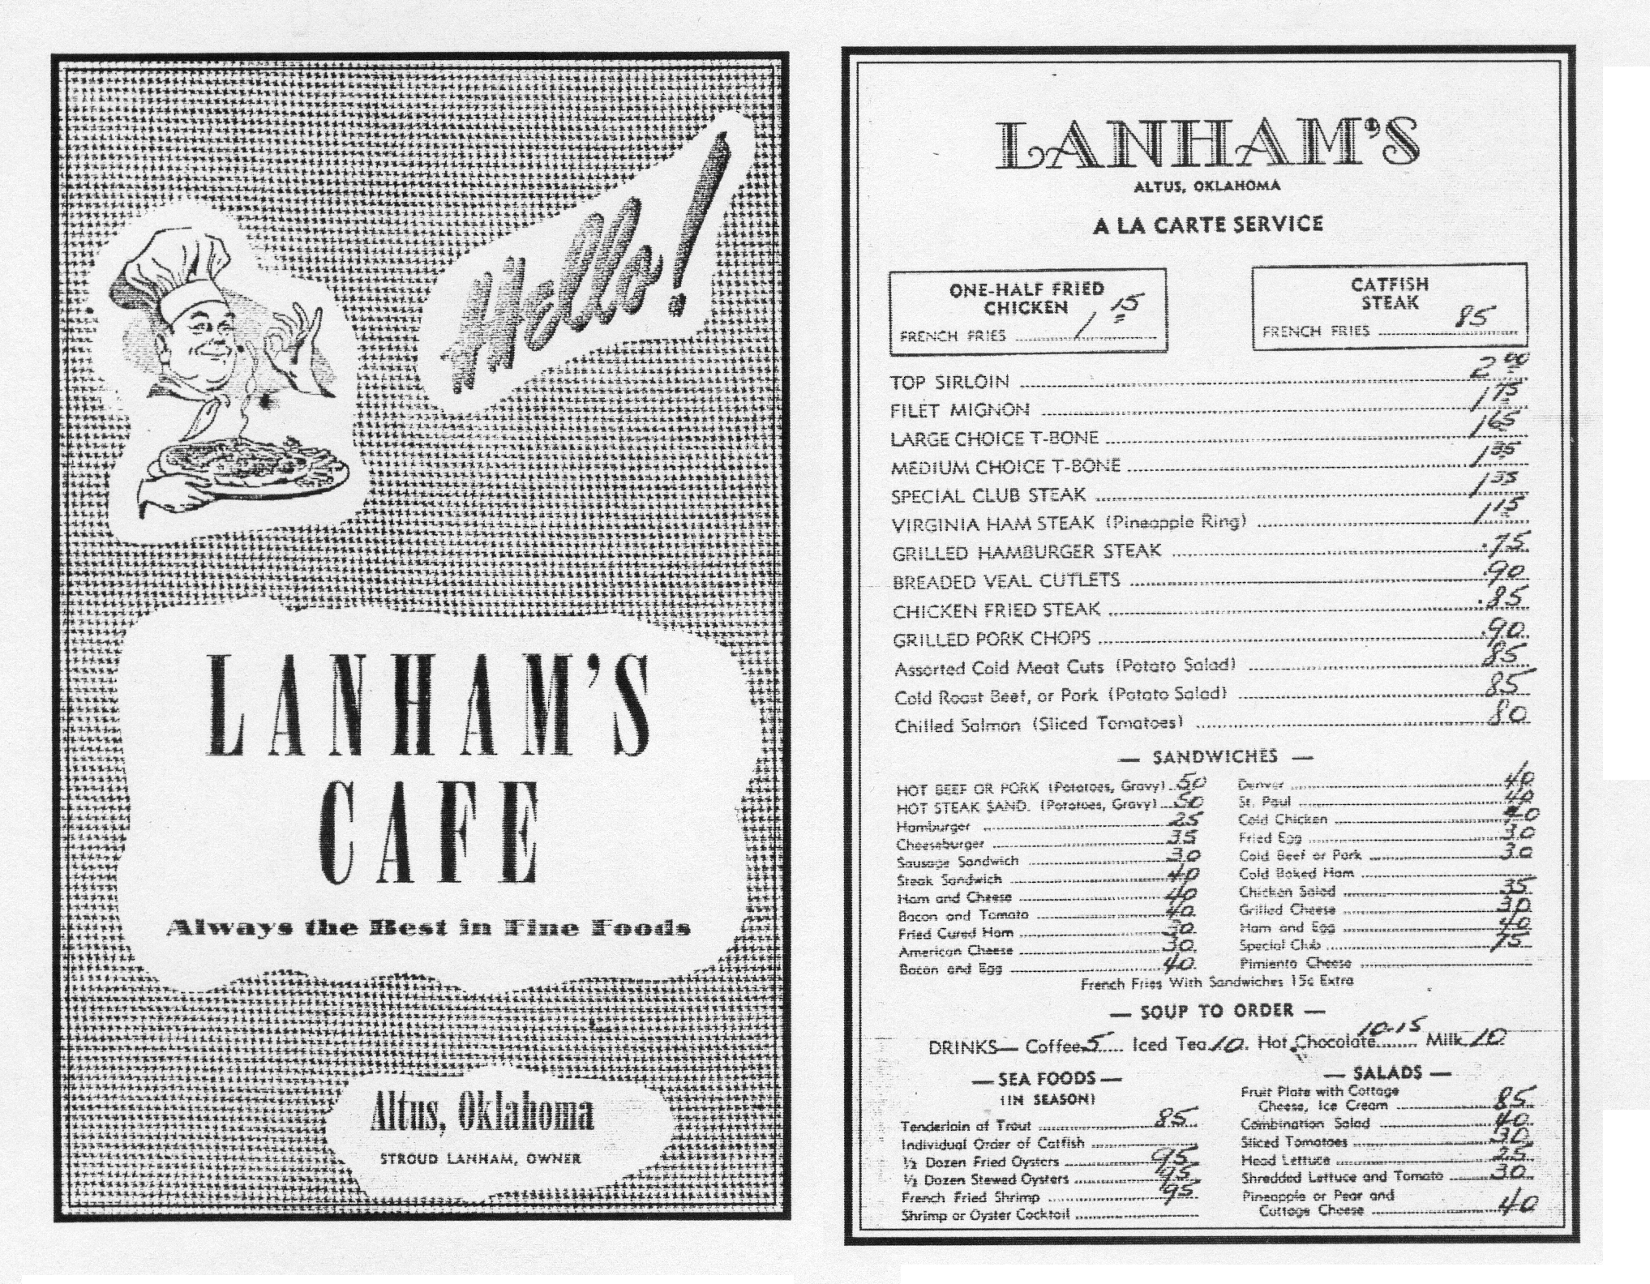 black and white scan of the menu